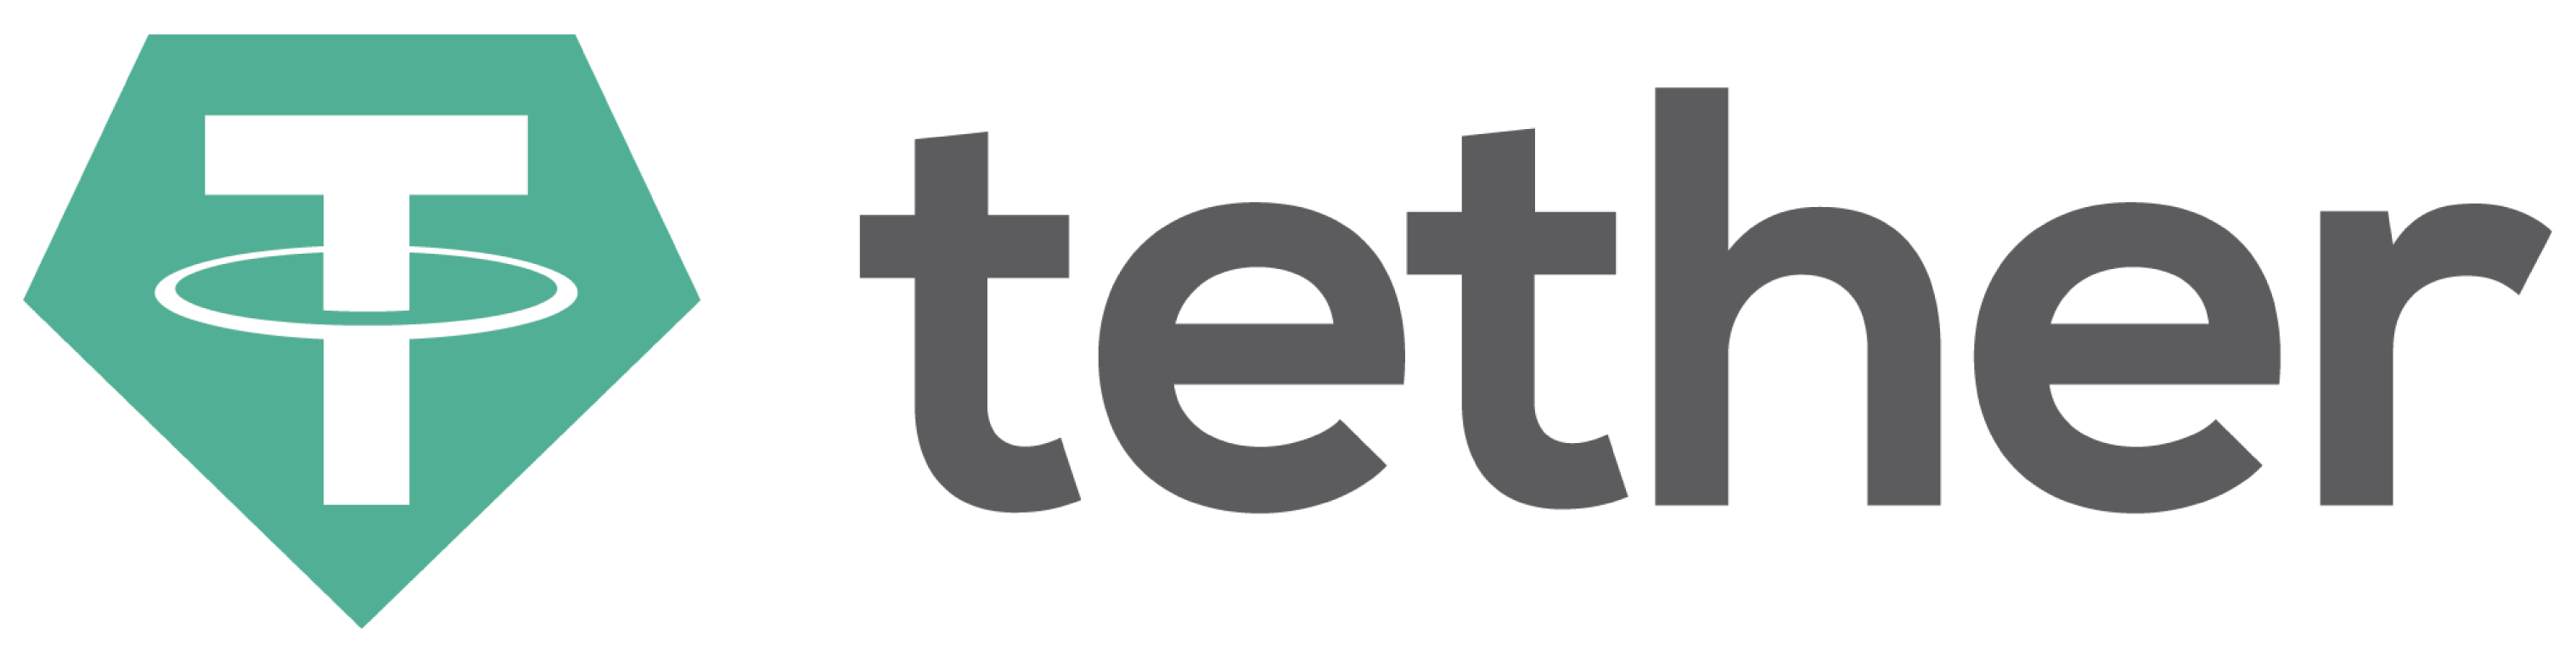 Tether logo colors